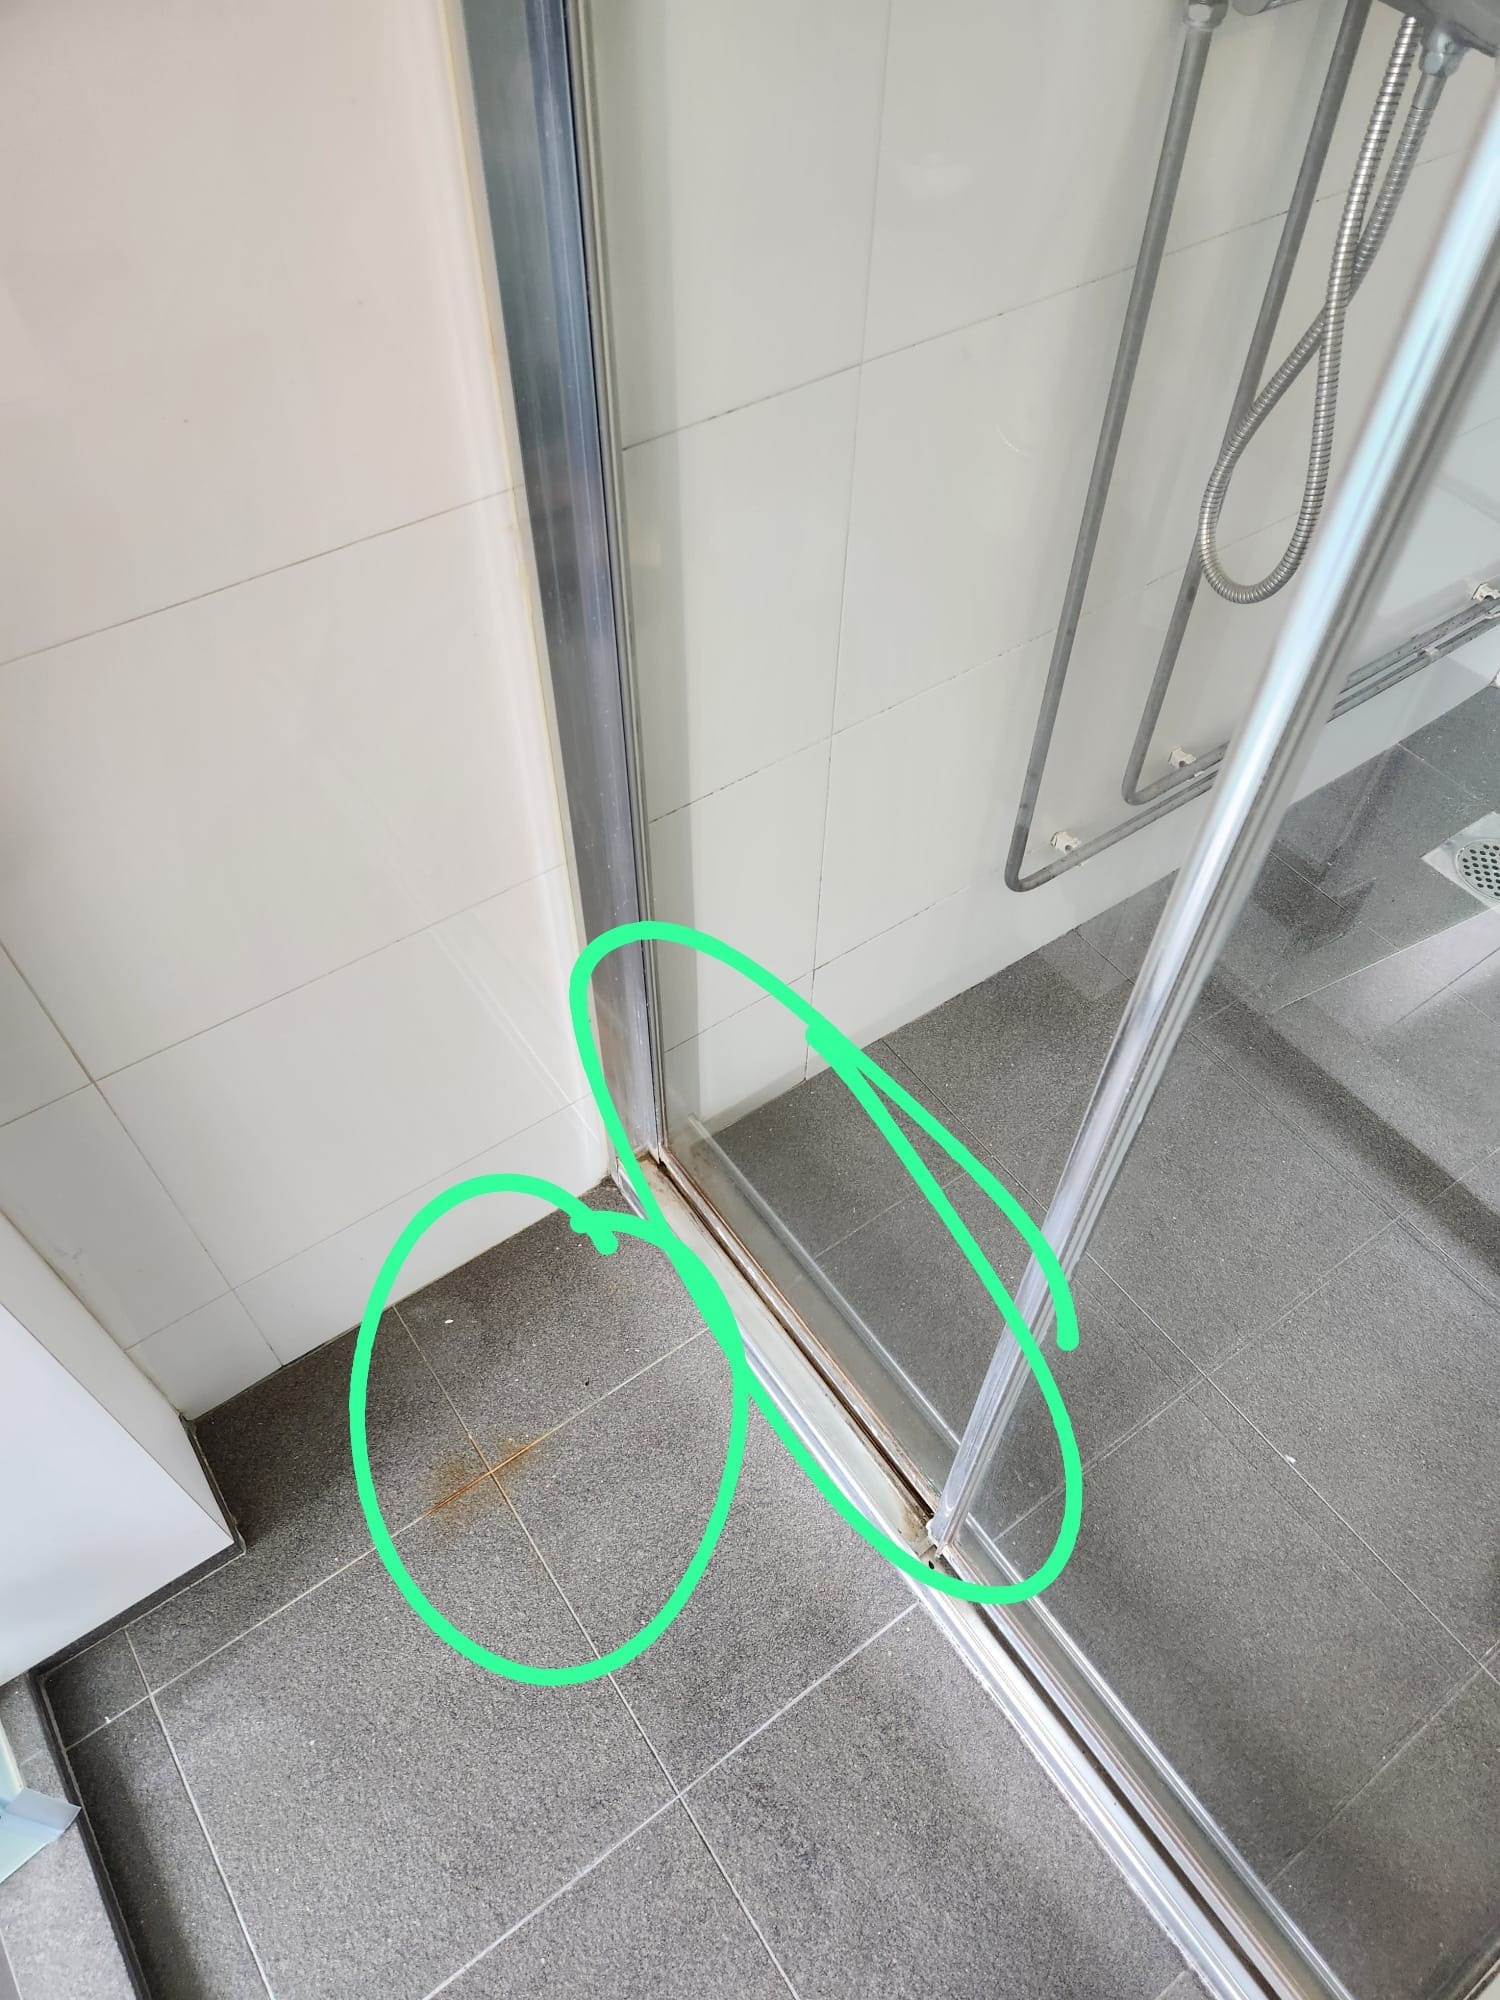 Stains on the floor caused by previous cleaning companies.